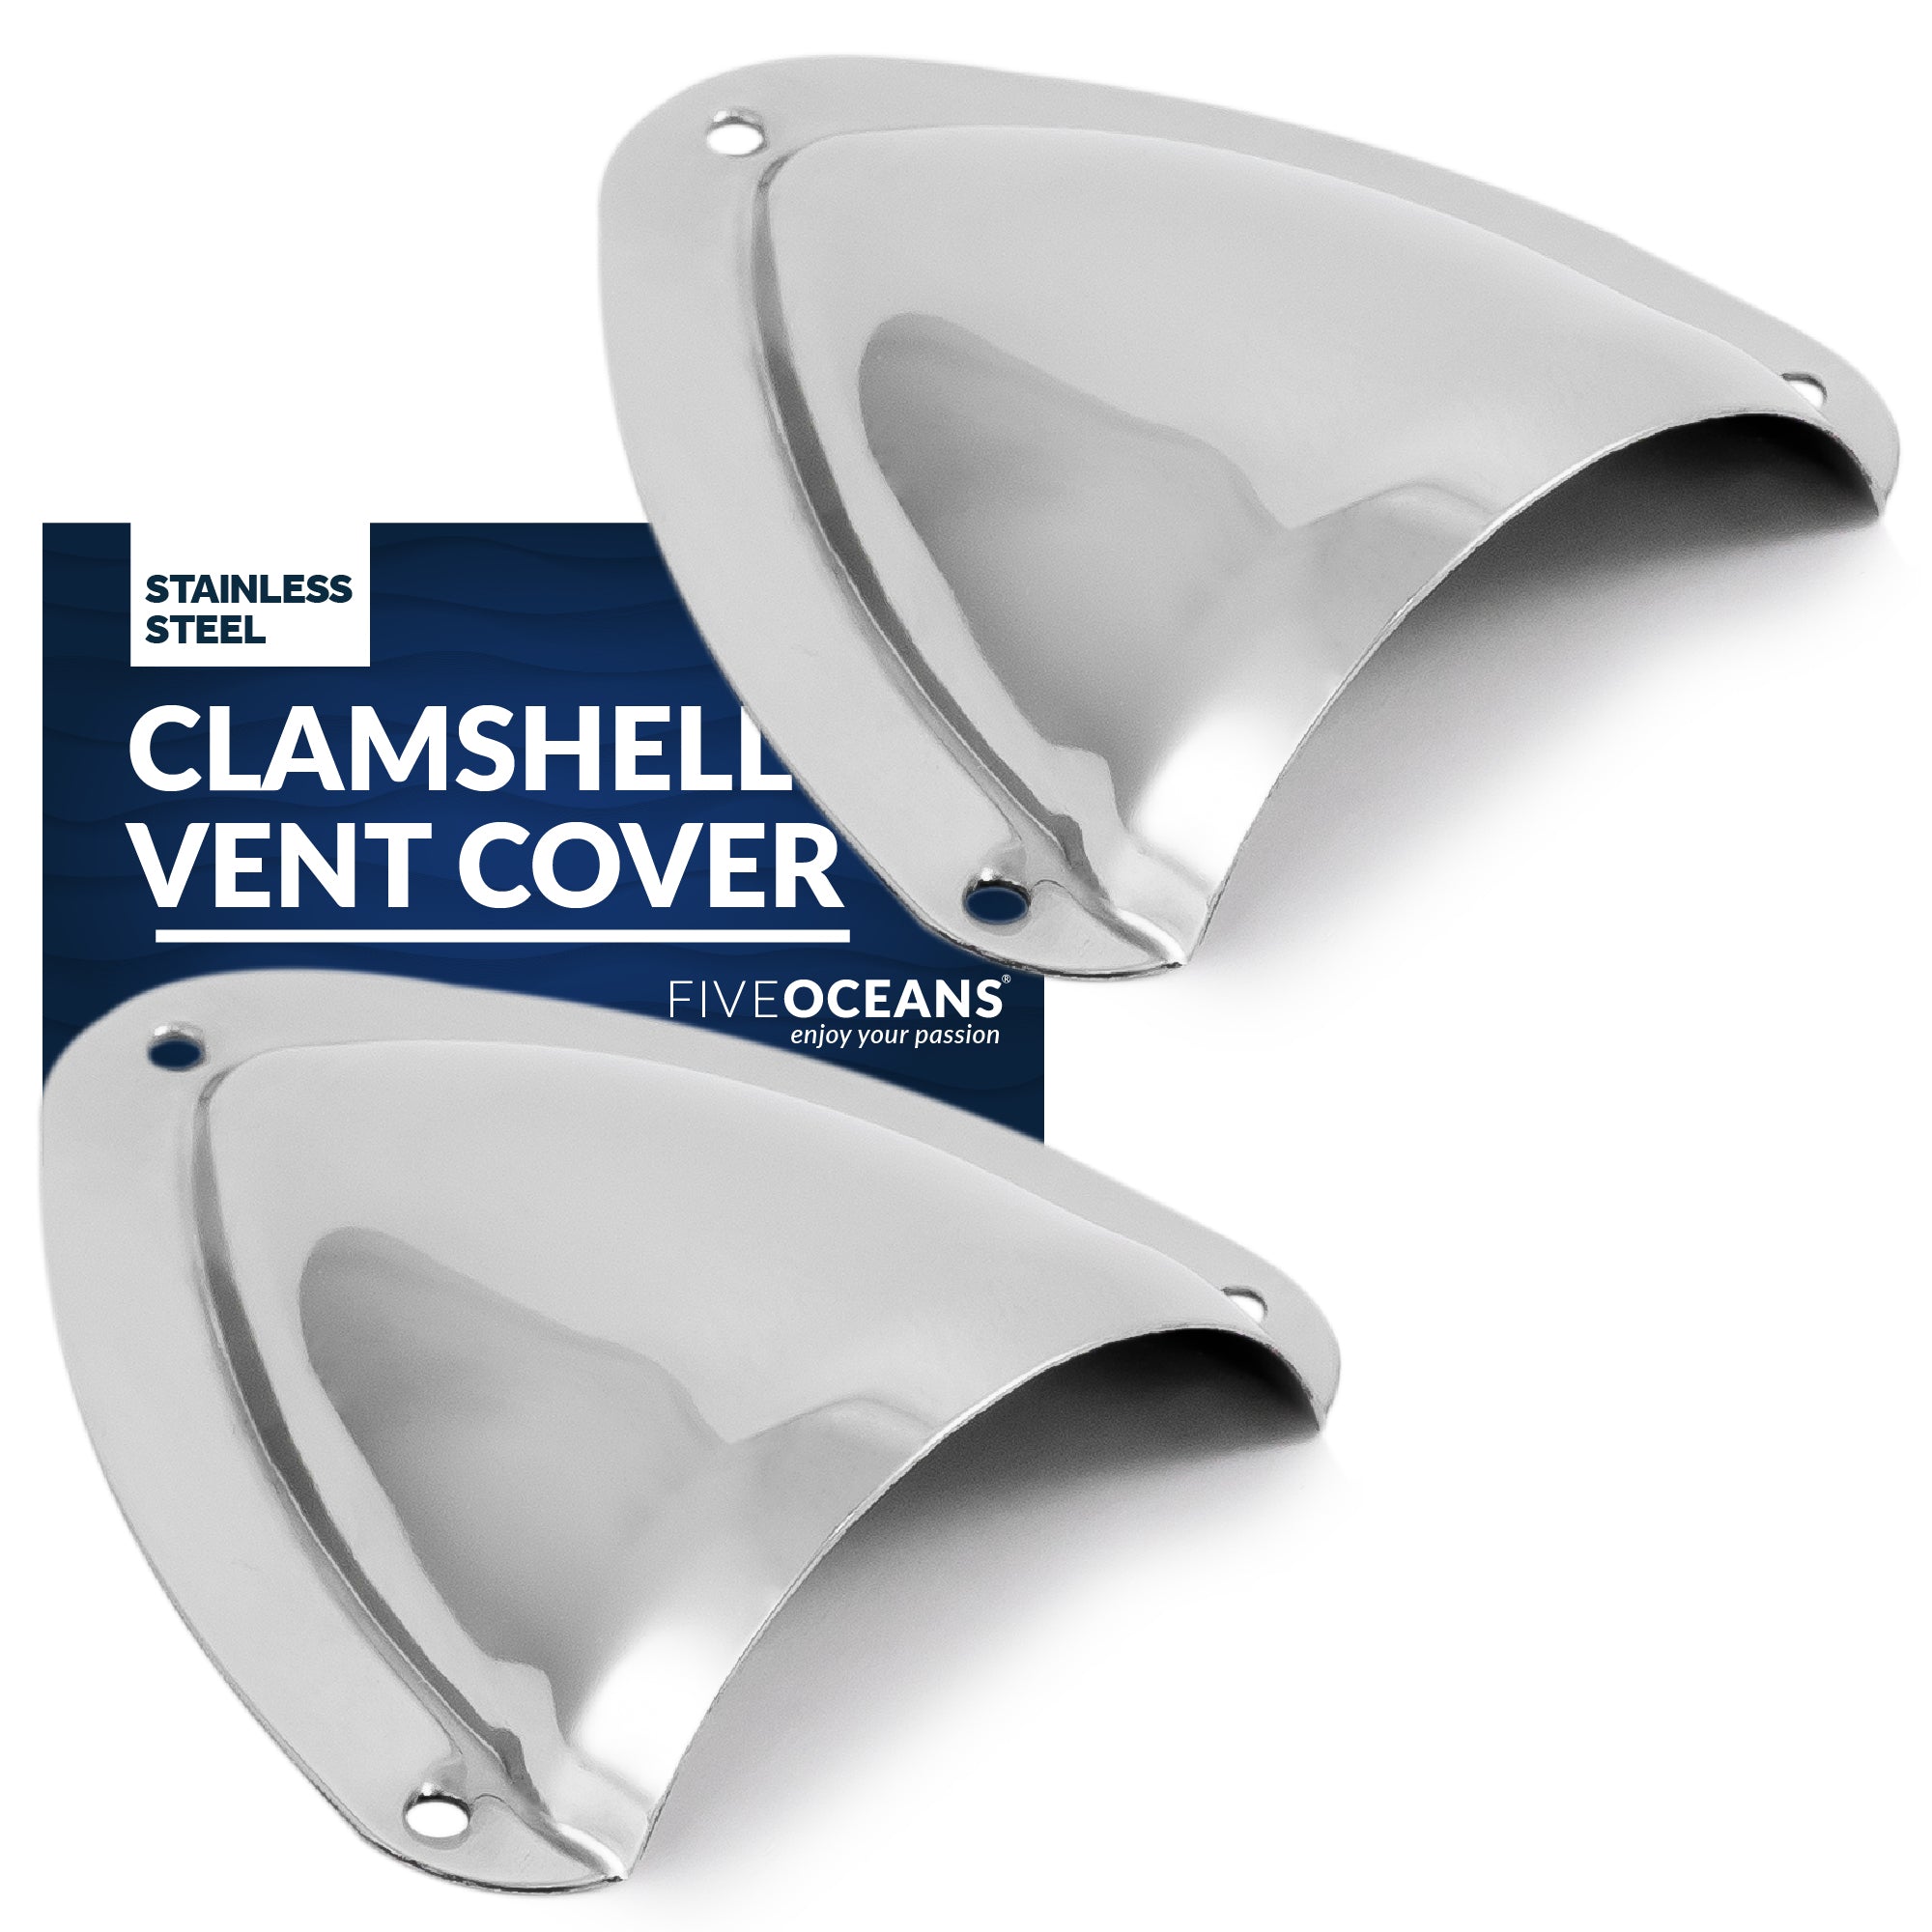 Clamshell Vent Cover, Base 3-11/16" L x 3-7/16" W, Stainless Steel - 2-Pack - FO4010-M2